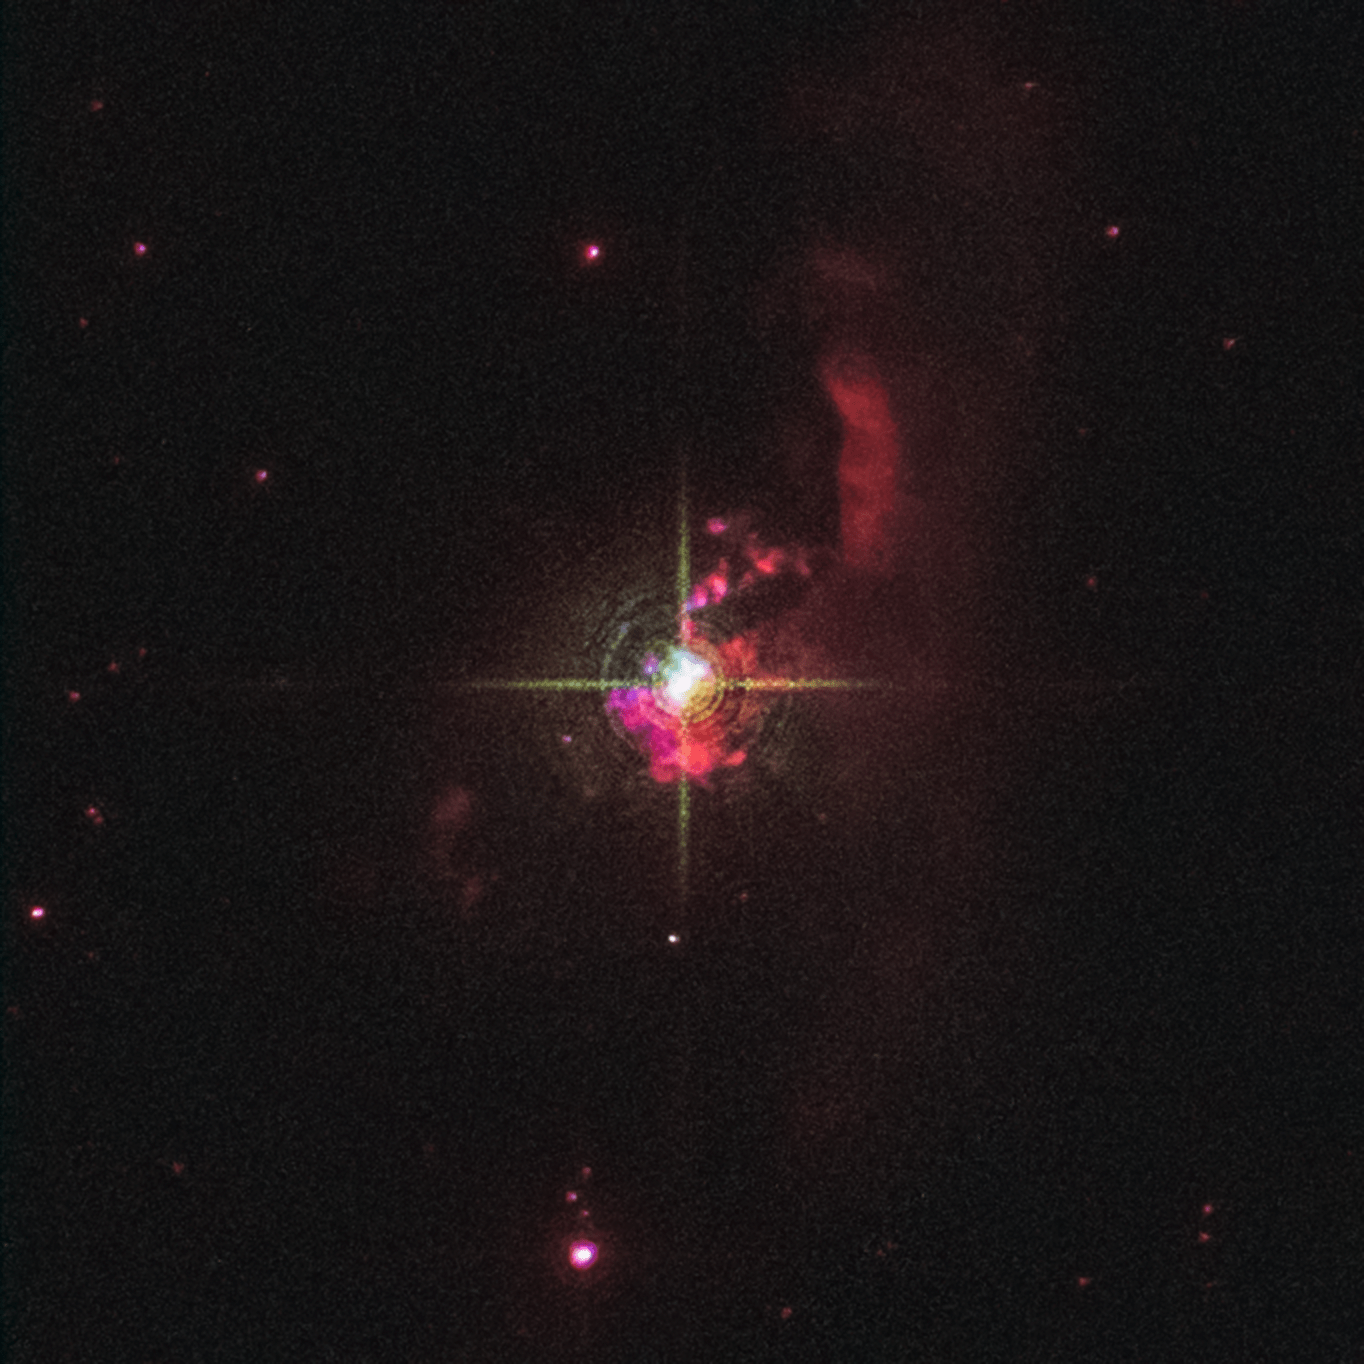 At the center of the image is a bright white star with four prominent diffraction spikes. The star is surrounded by clumpy red nebulosity. A more translucent, red finger-shaped cloud of material points upward to the star's upper right. Hubble Space The black background of space is sprinkled with tiny red and white stars.